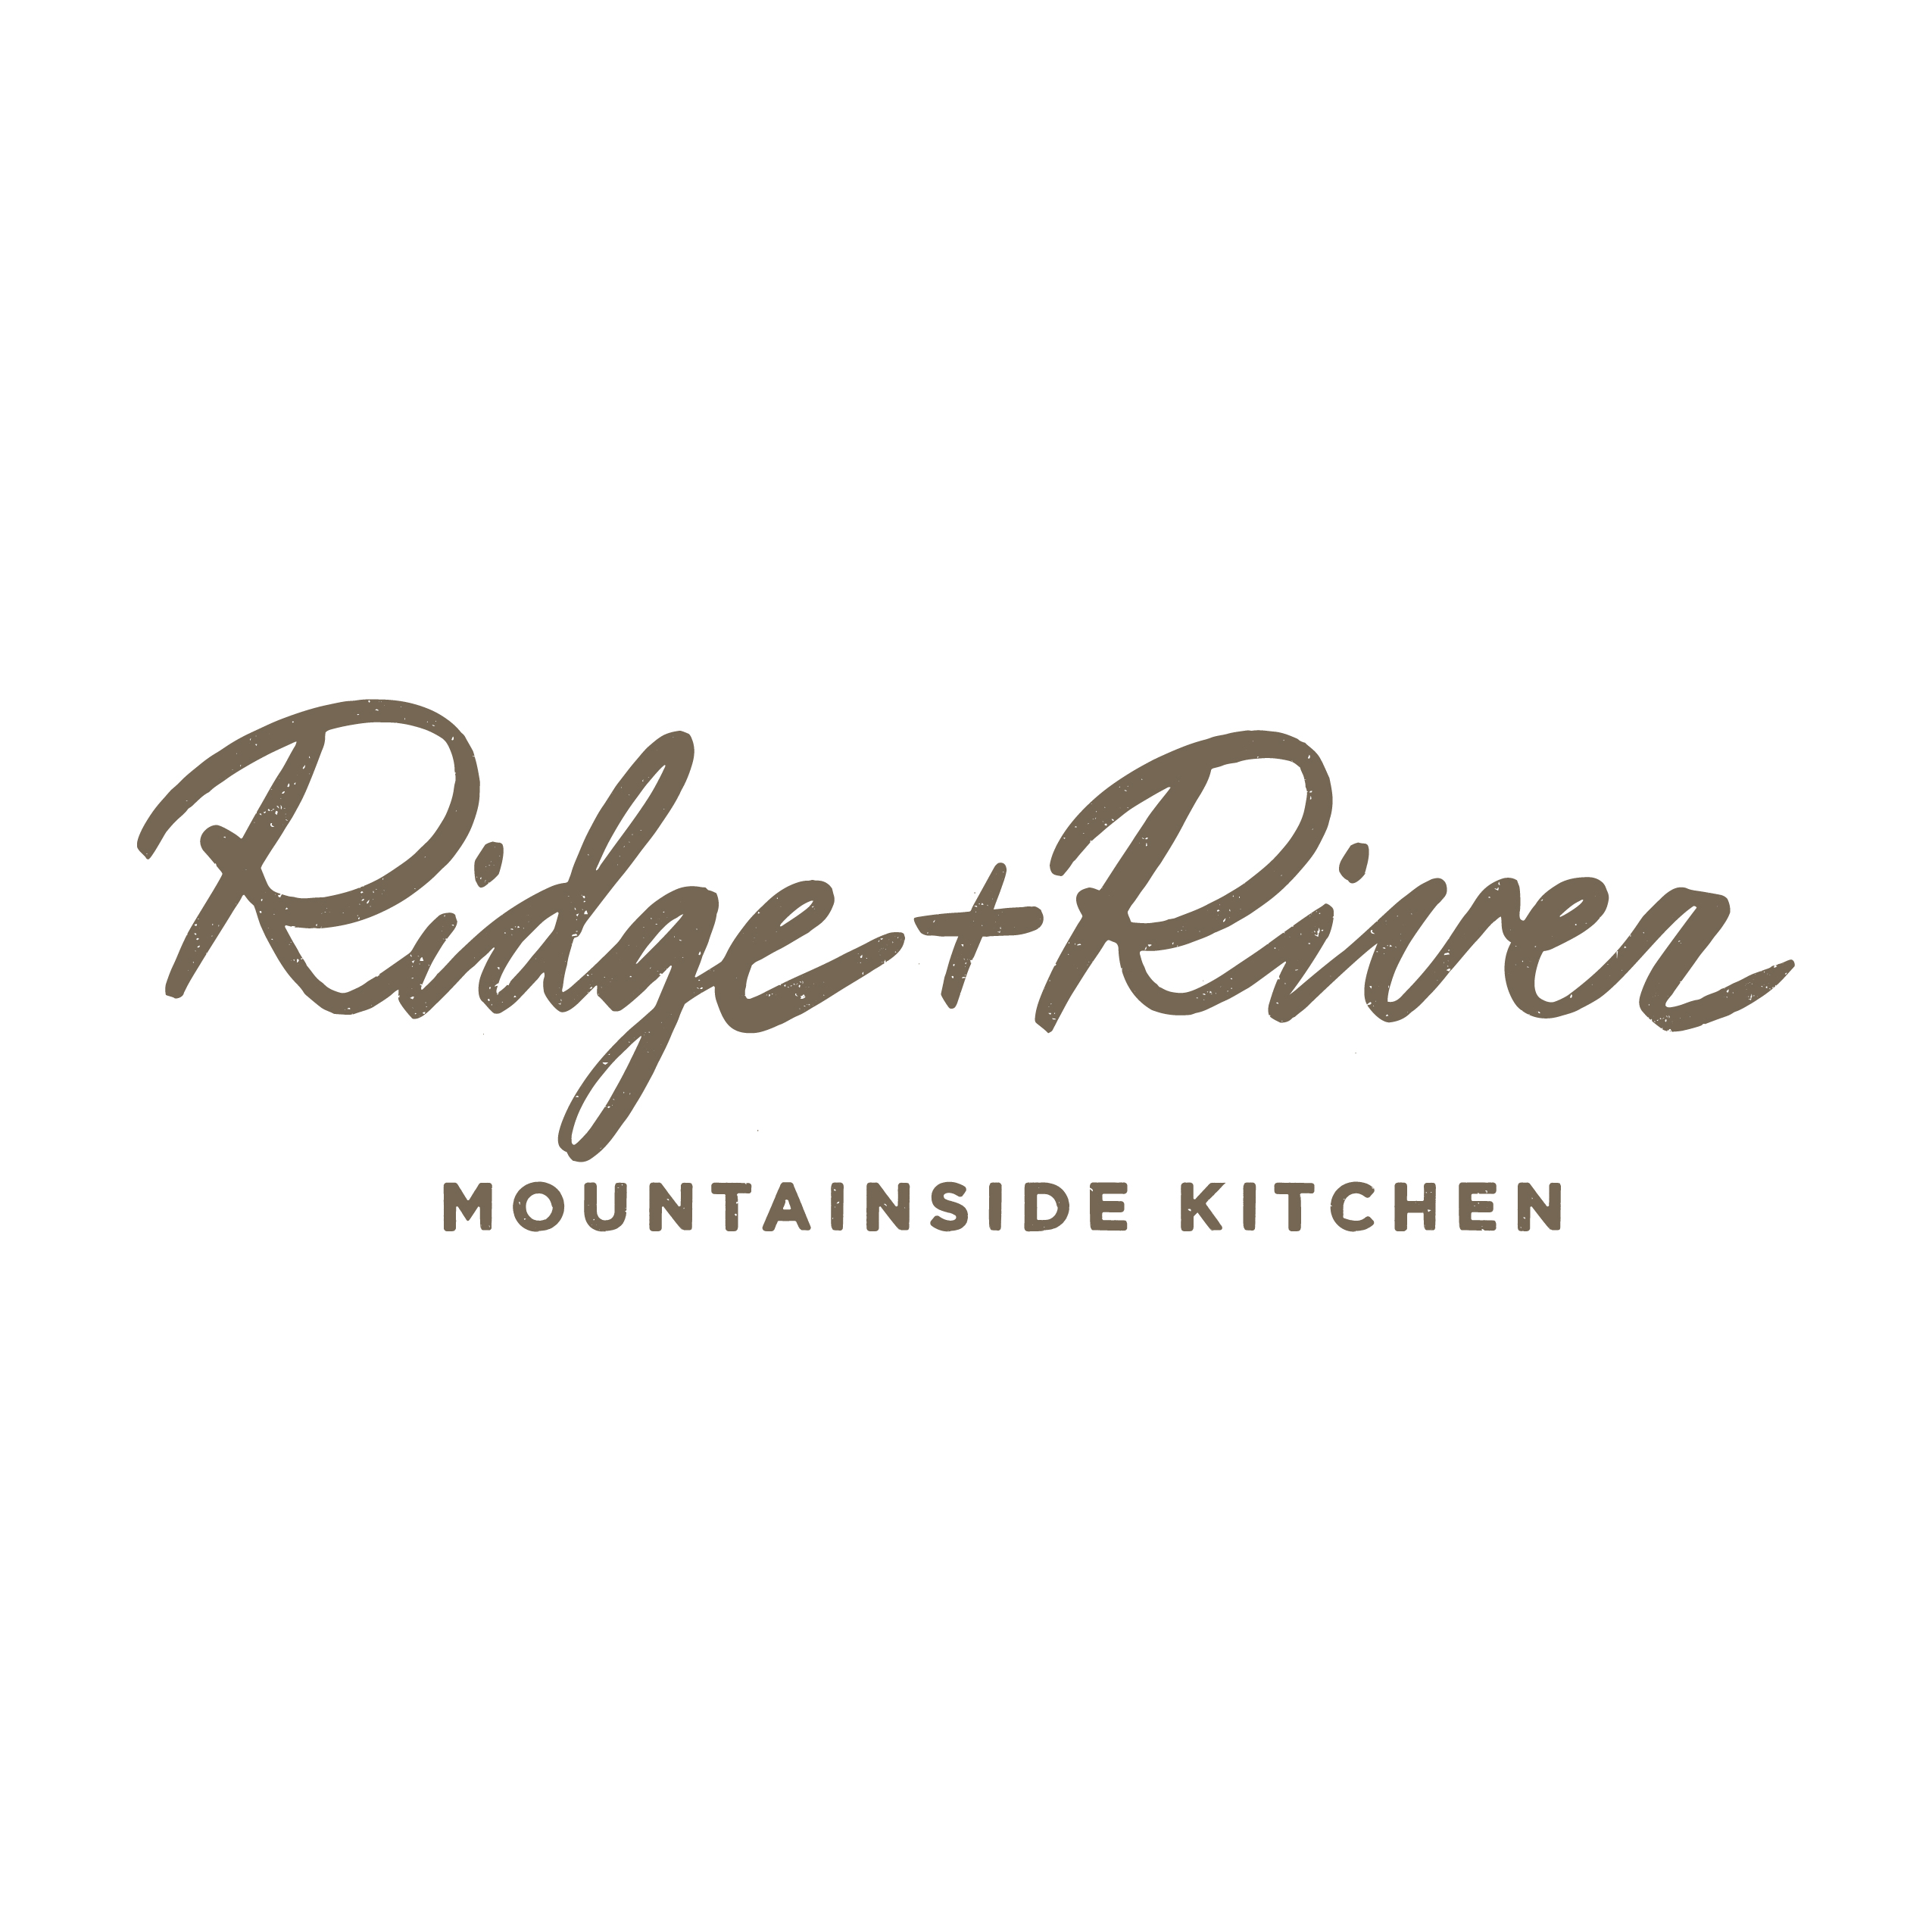 Ridge and River logo design by logo designer Banowetz + Company, Inc. for your inspiration and for the worlds largest logo competition